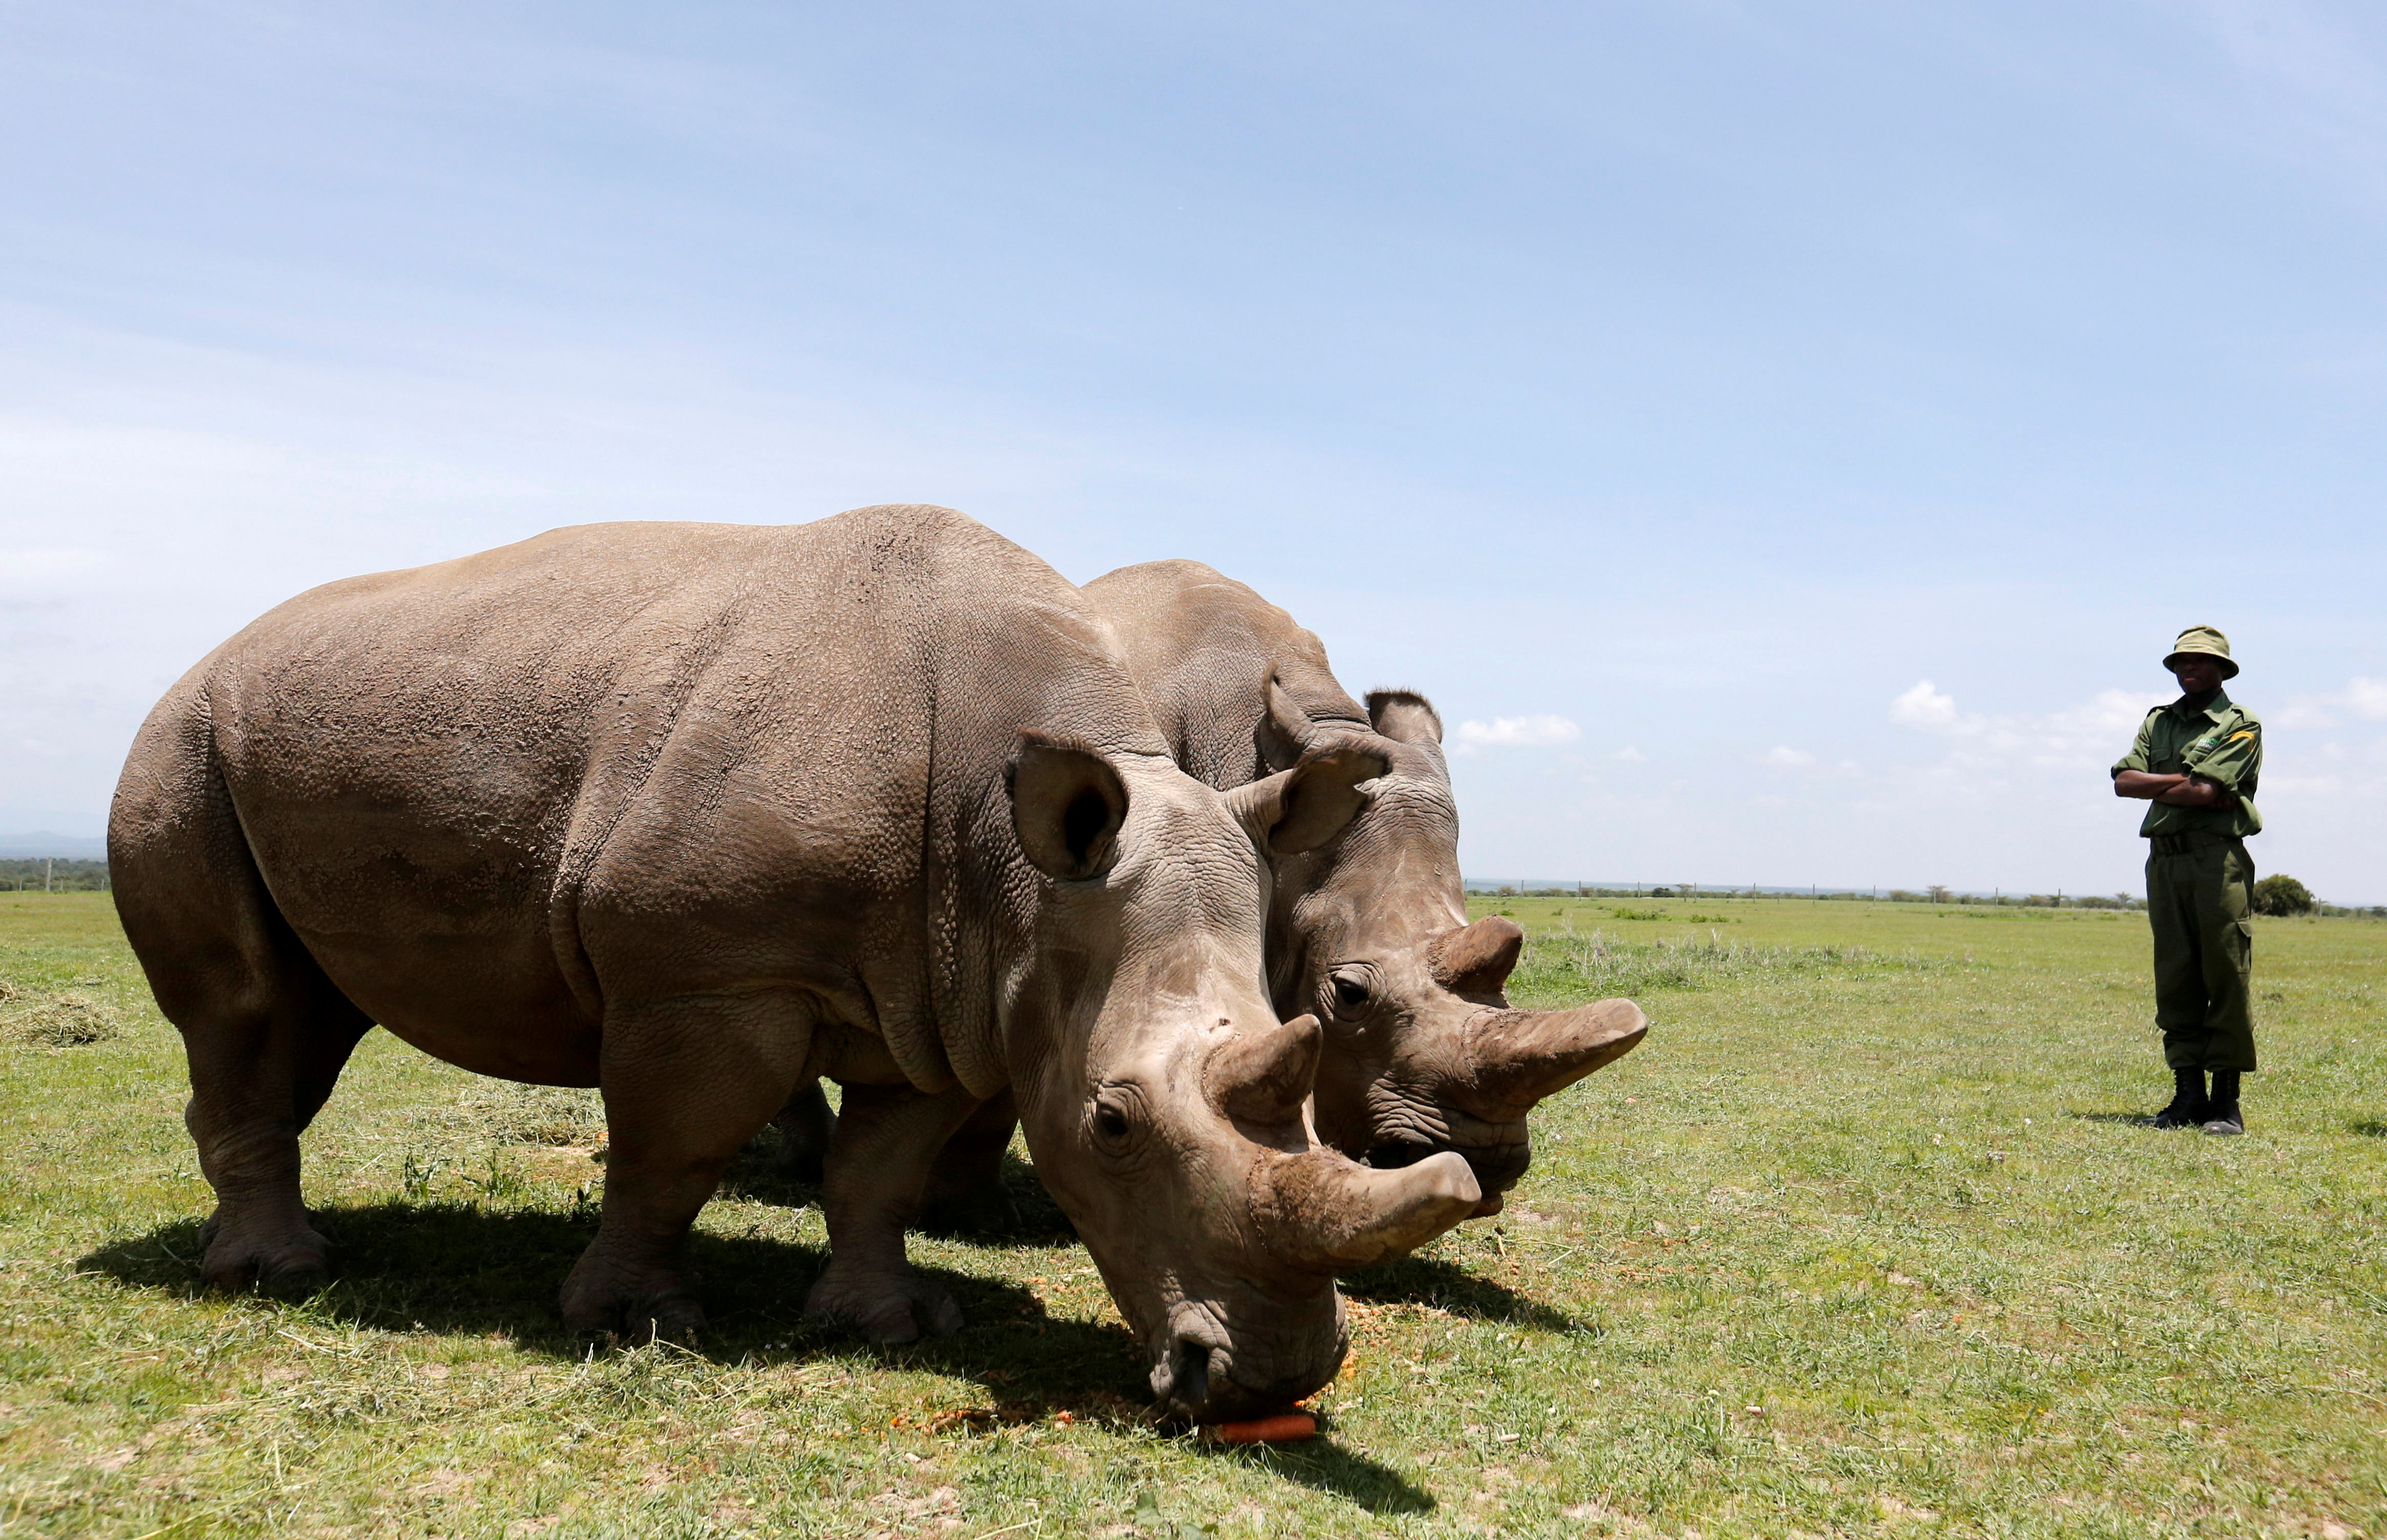 Najin (R) and her daughter Fatou, the last two northern white rhino females, graze near their enclosure at the Ol Pejeta Conservancy in Laikipia National Park, Kenya March 31, 2018. REUTERS/Thomas Mukoya